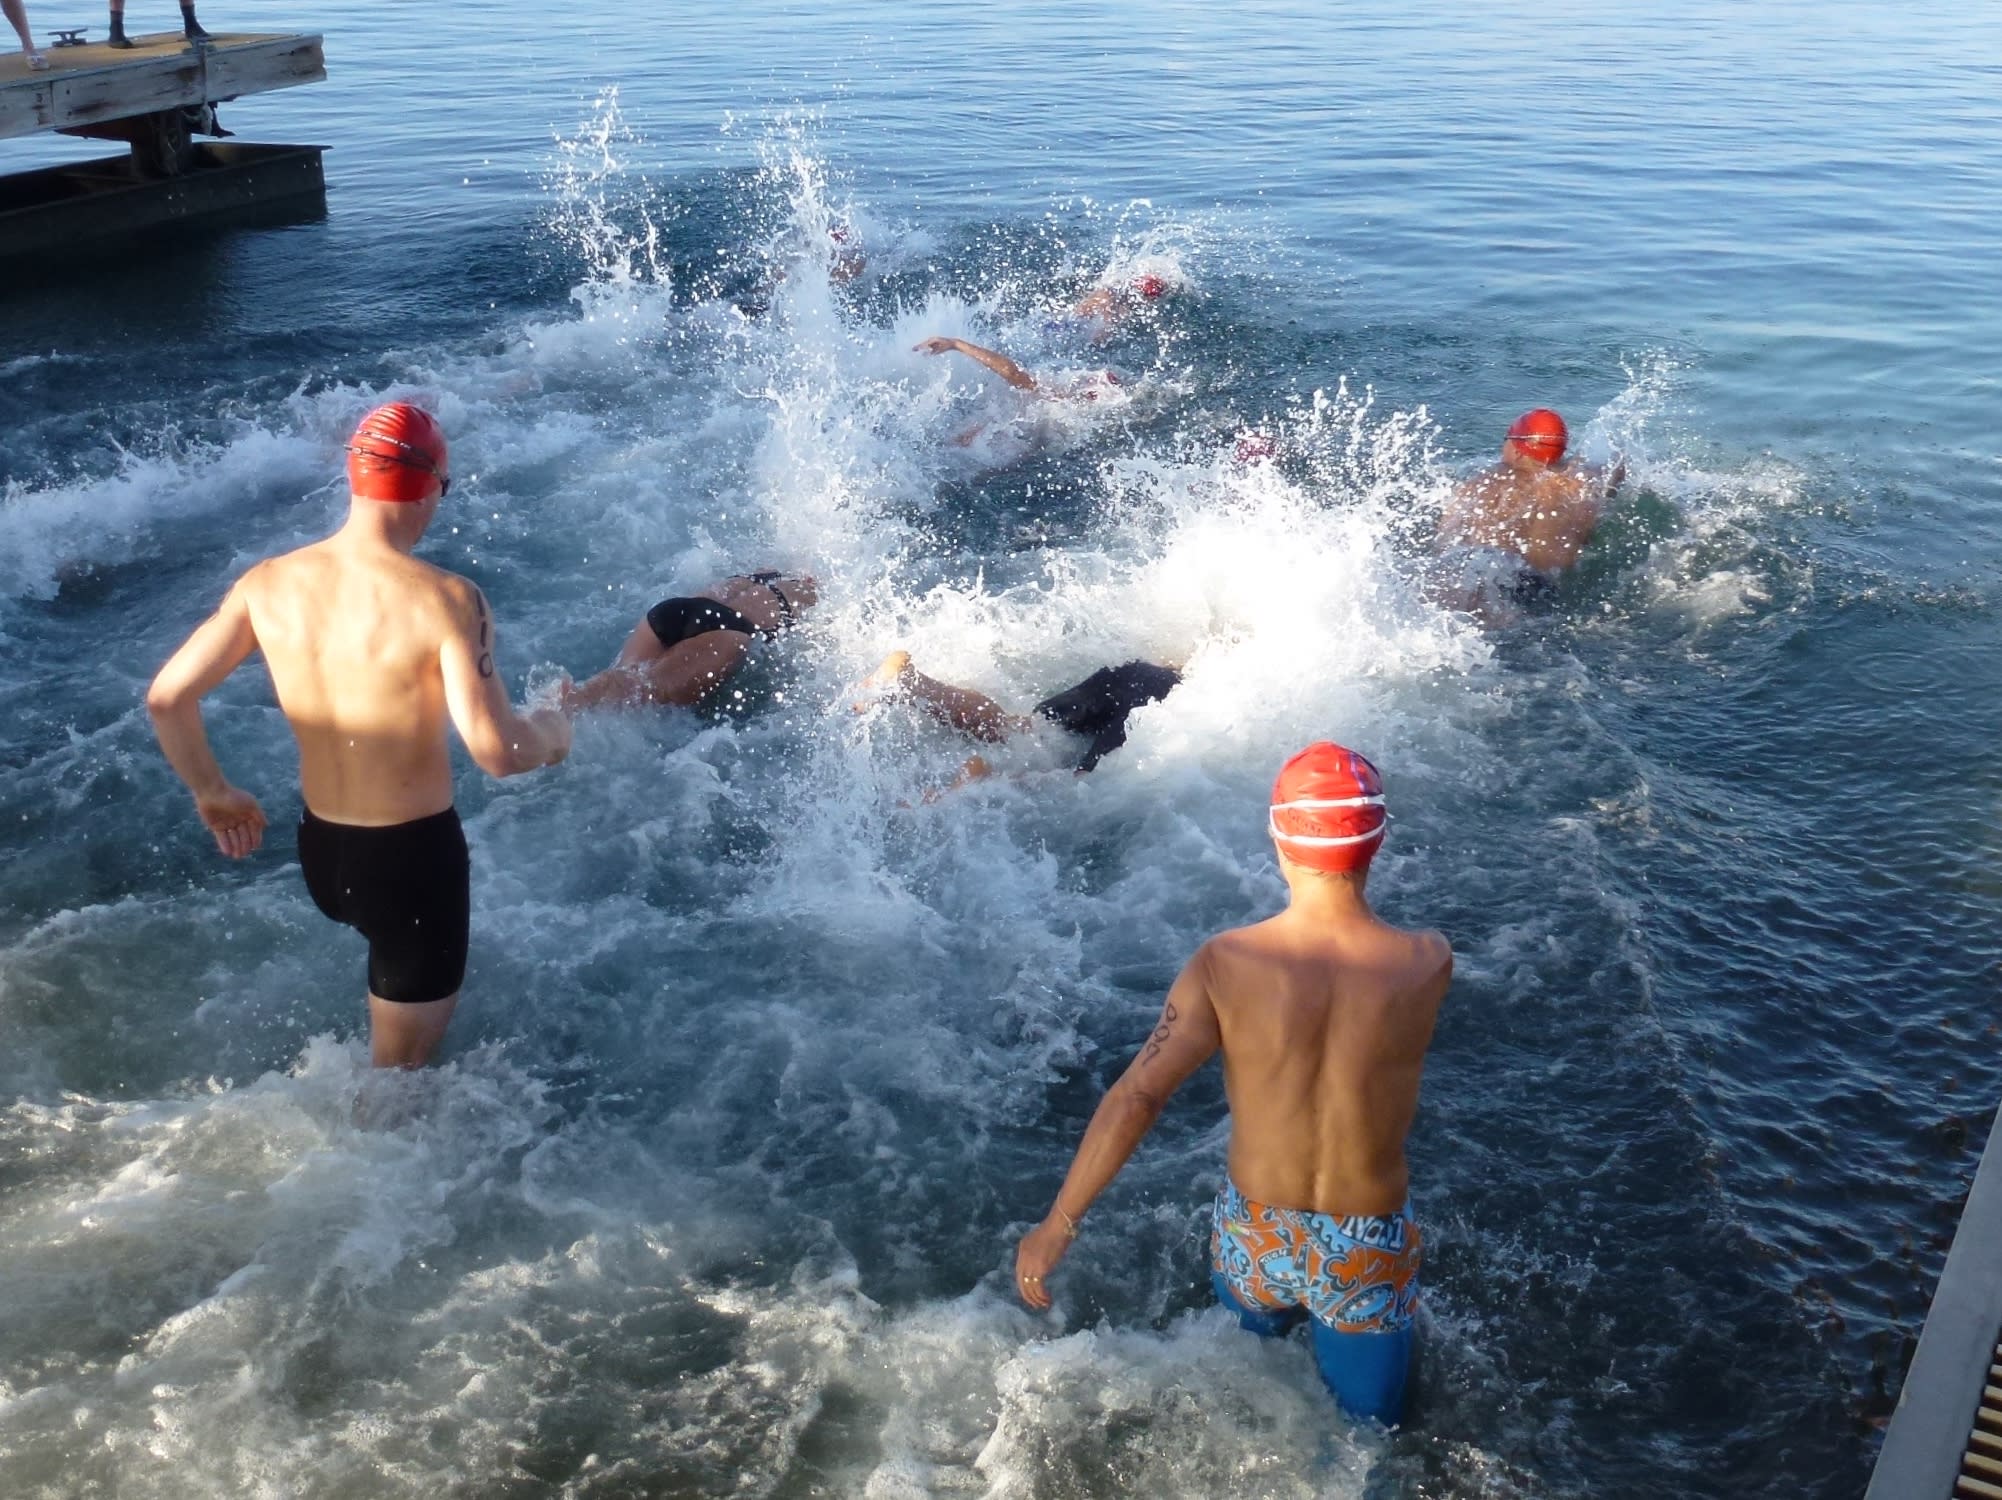 Swimmers enter the water at the start of the race.